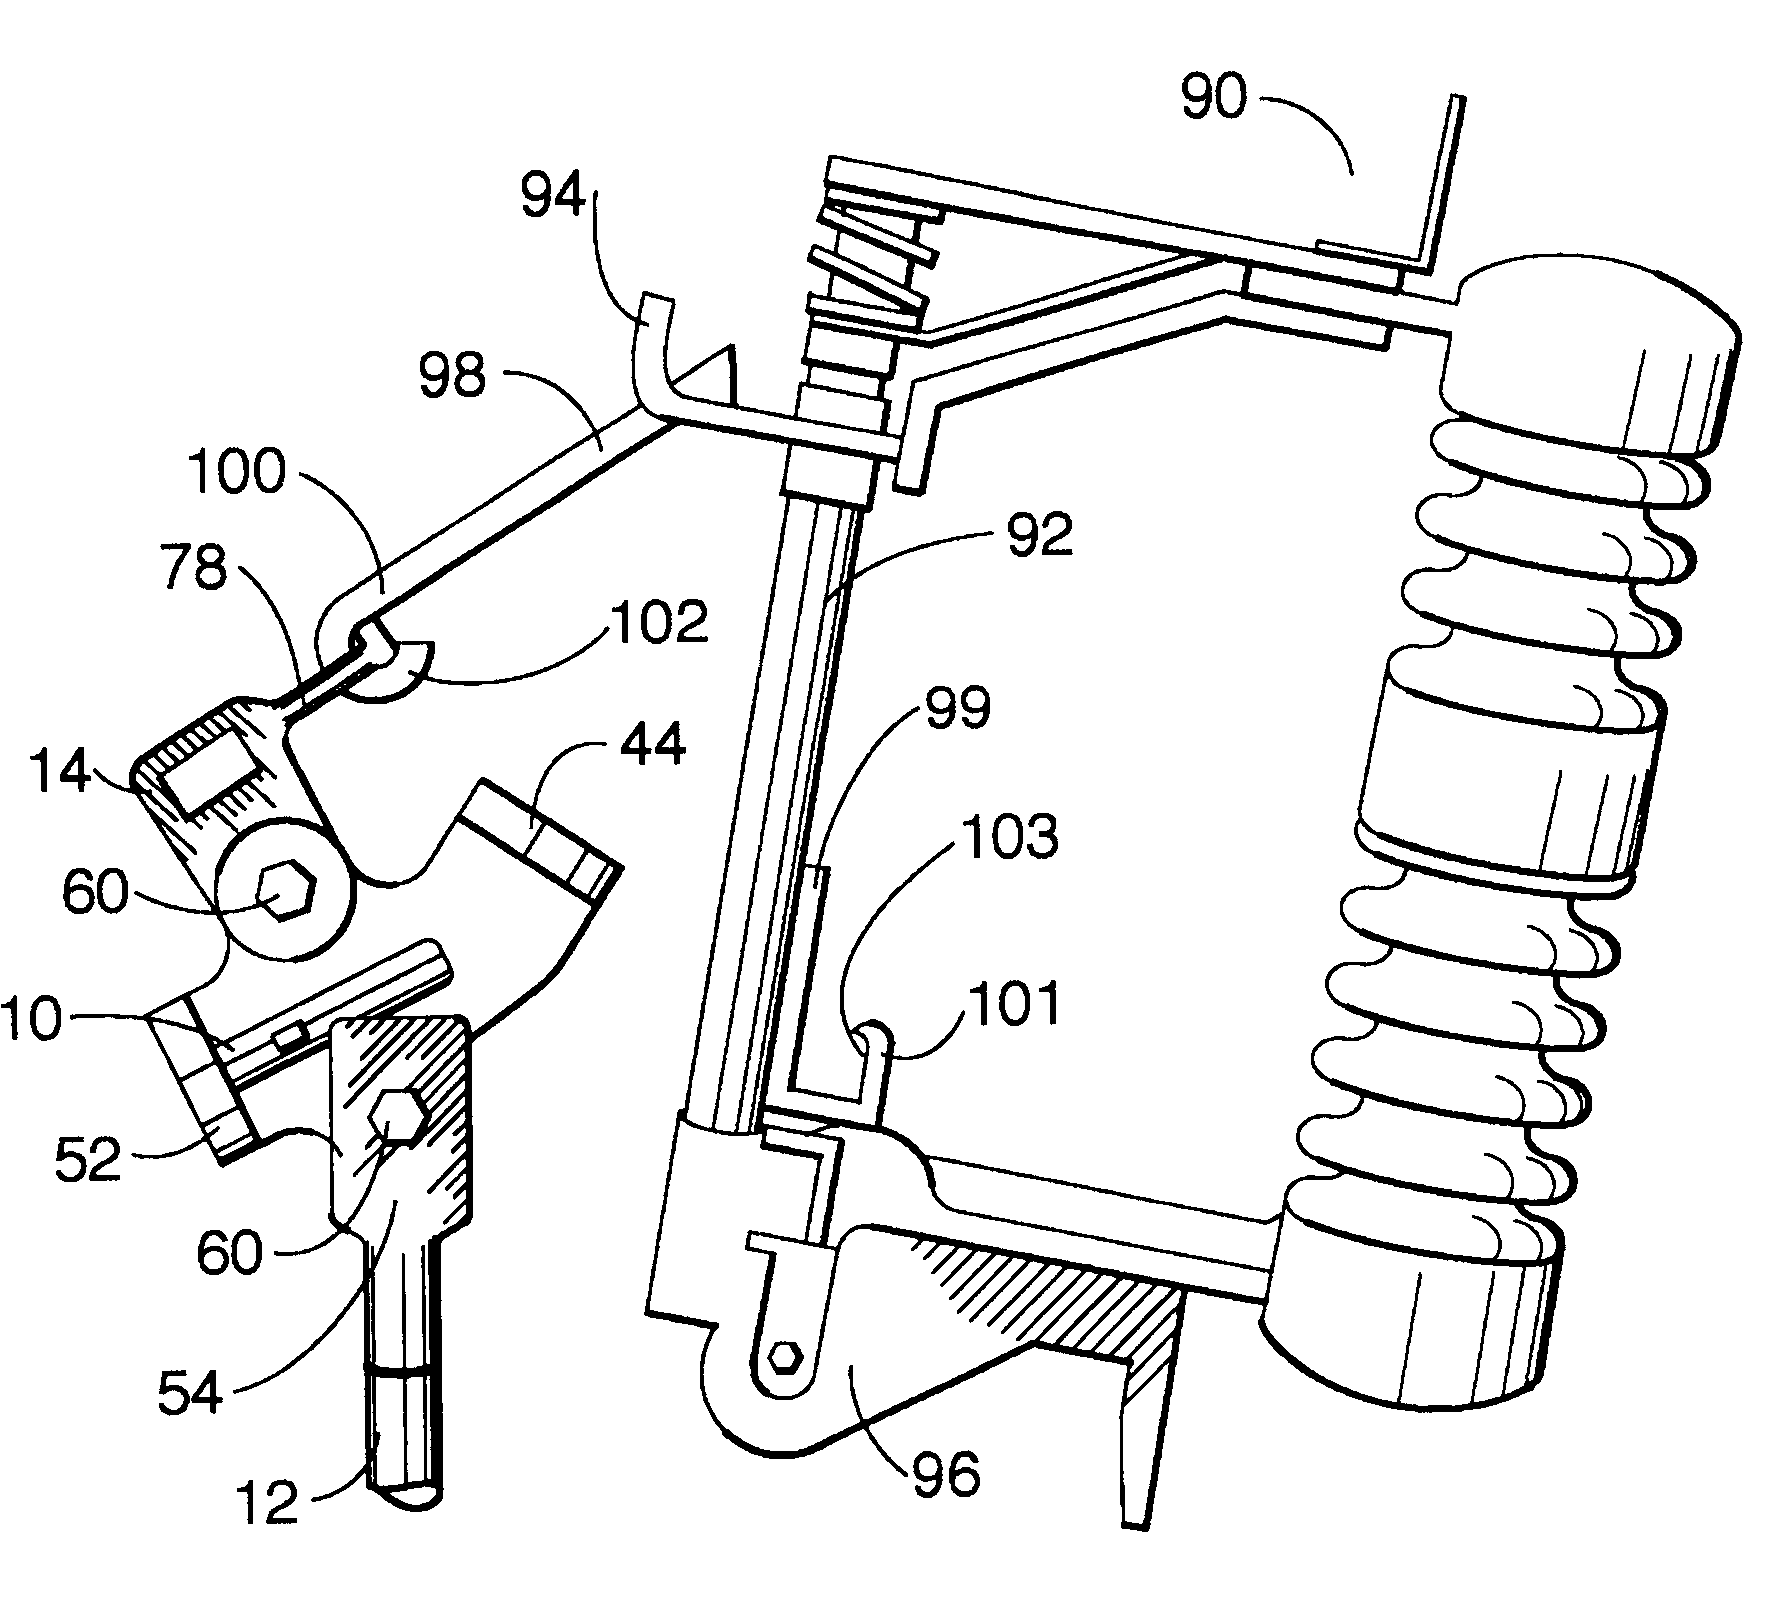 Method for operating remote electrical distribution equipment with transitional light-emitive member disposed intermediate an elongate member and a tool